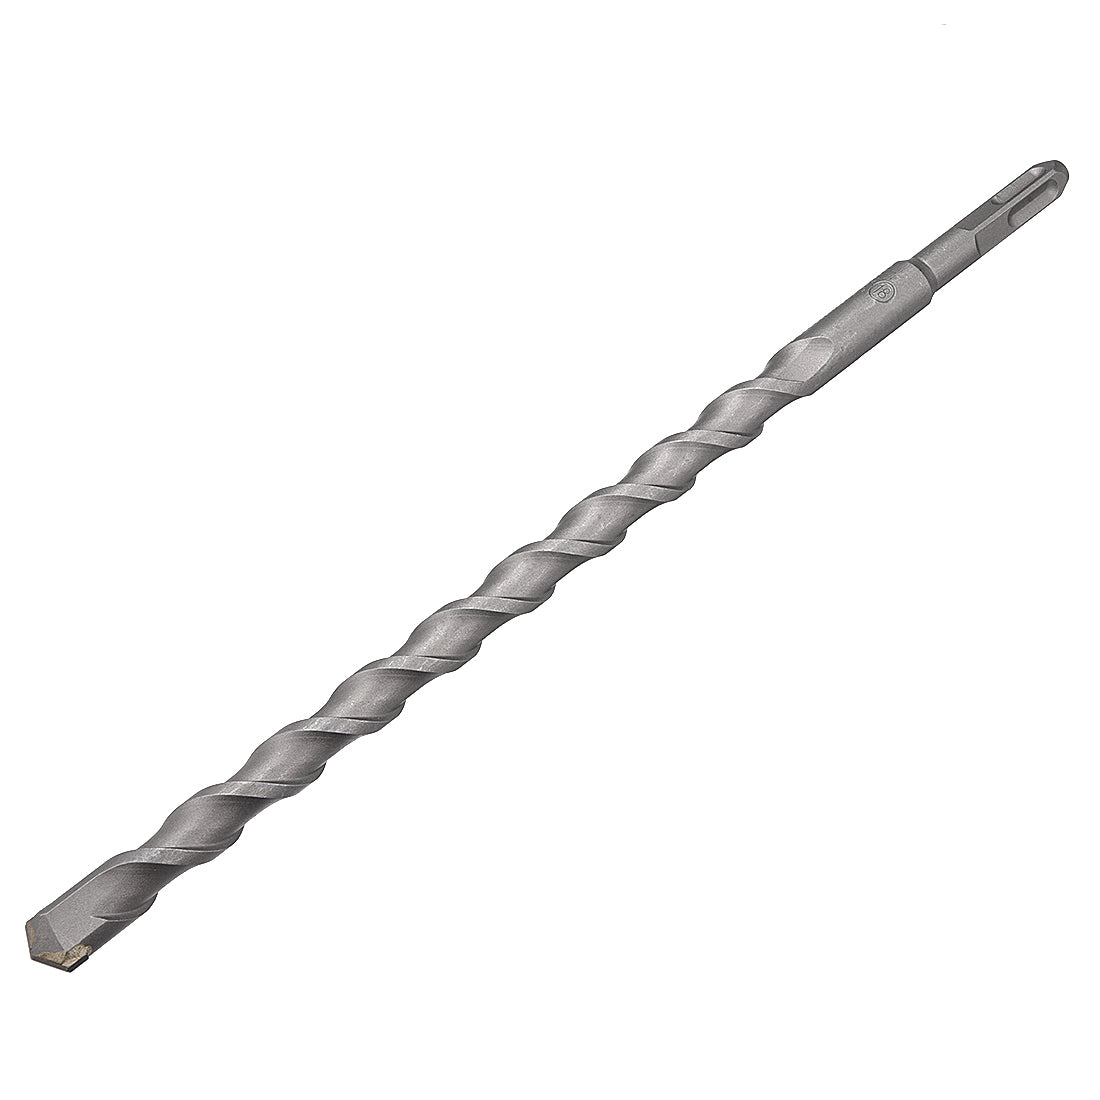 uxcell Uxcell Masonry Drill Bit 18mmx350mm 9mm Square Shank for Impact Drill